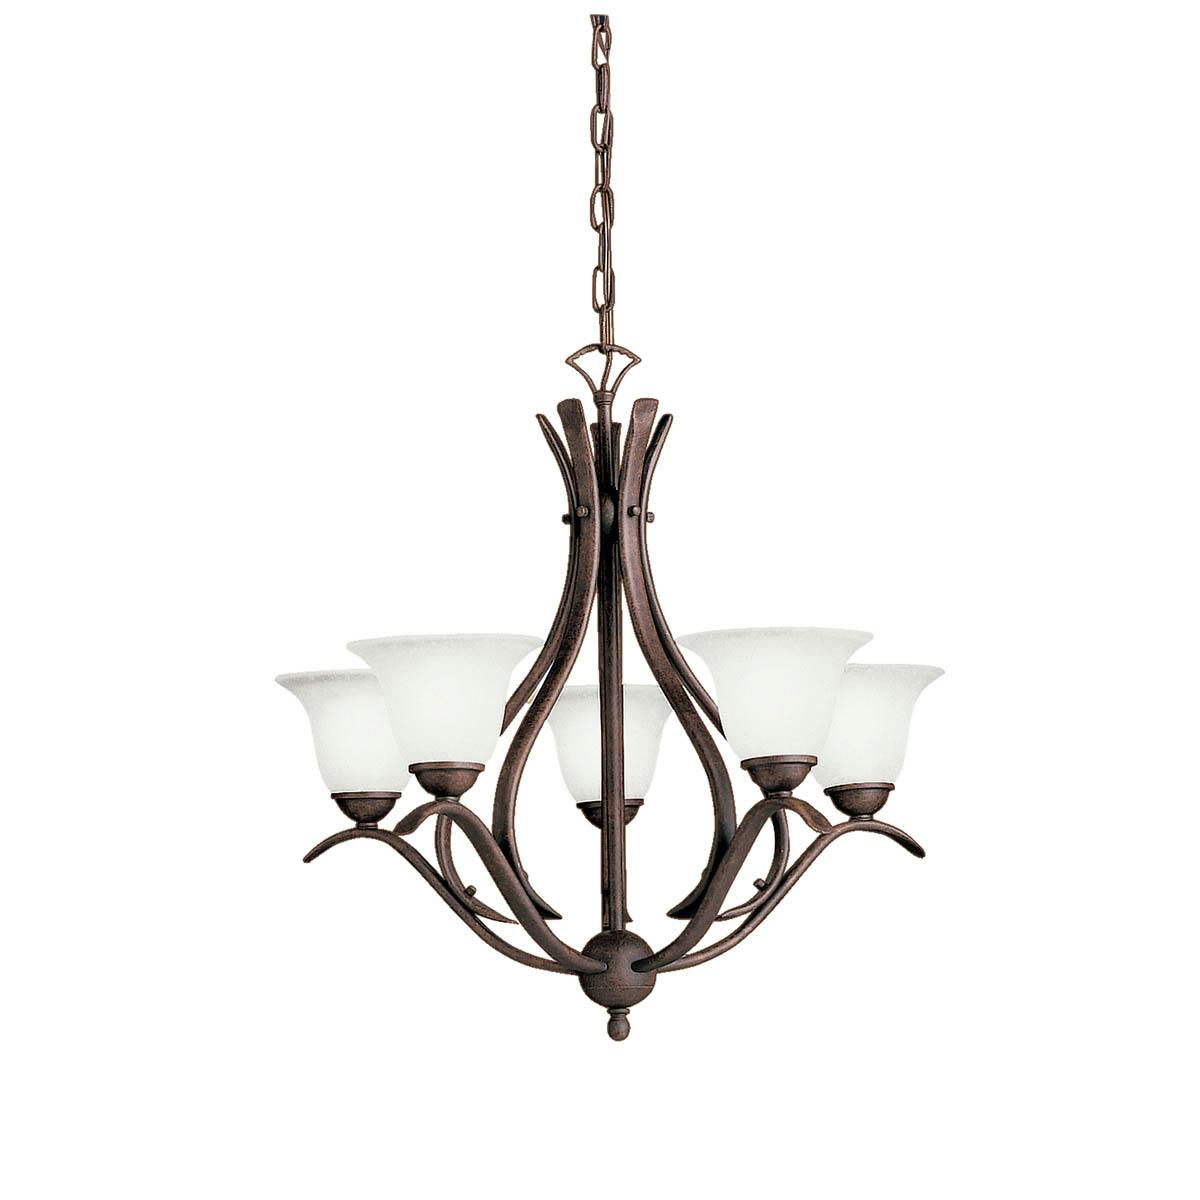 The Dover 23" 5 light chandelier Bronze on a white background